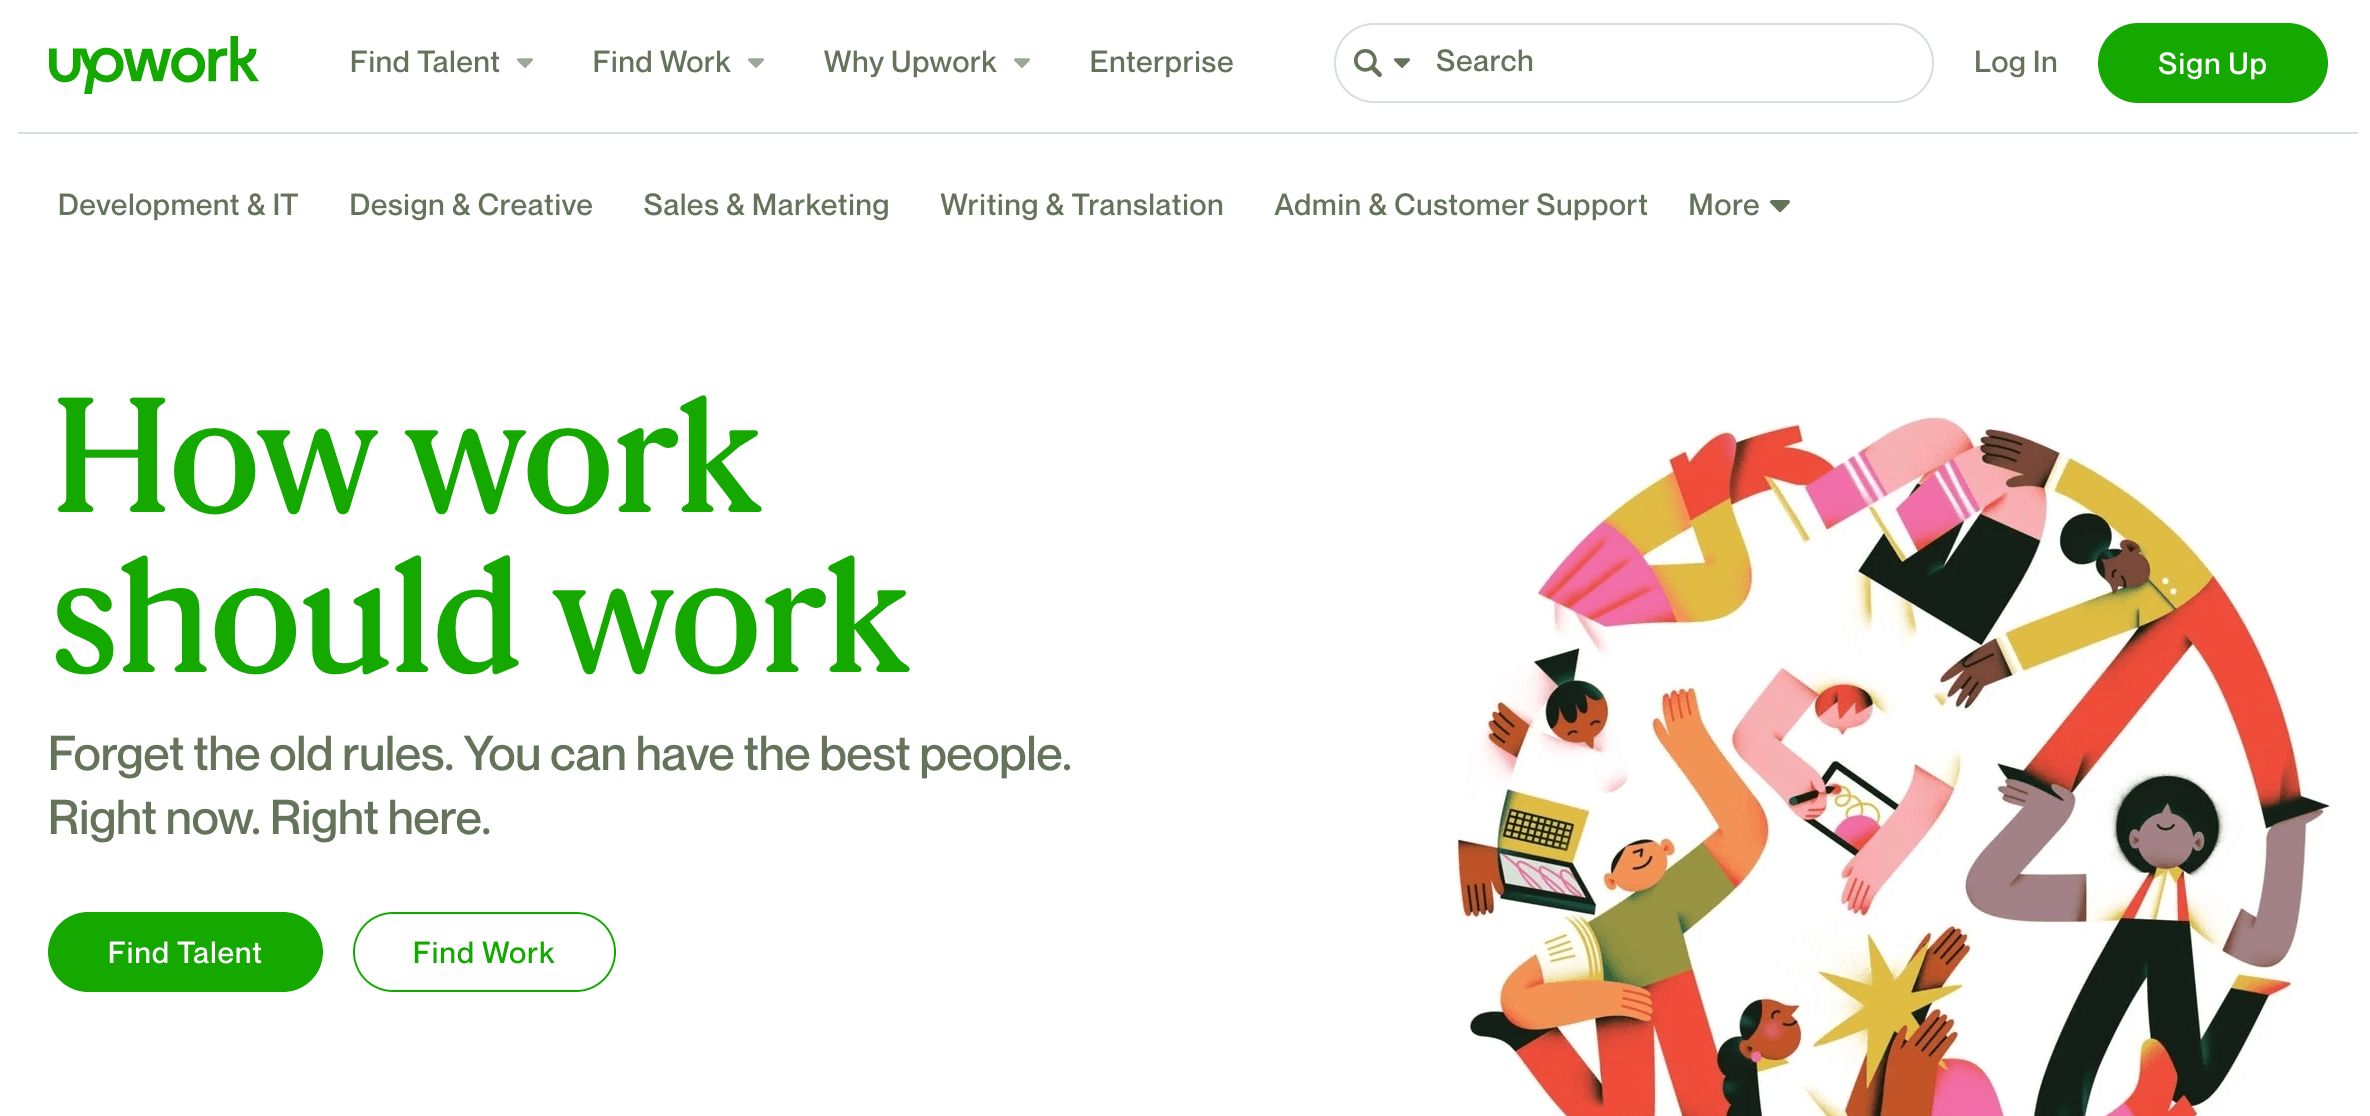 Upwork homepage, with logo